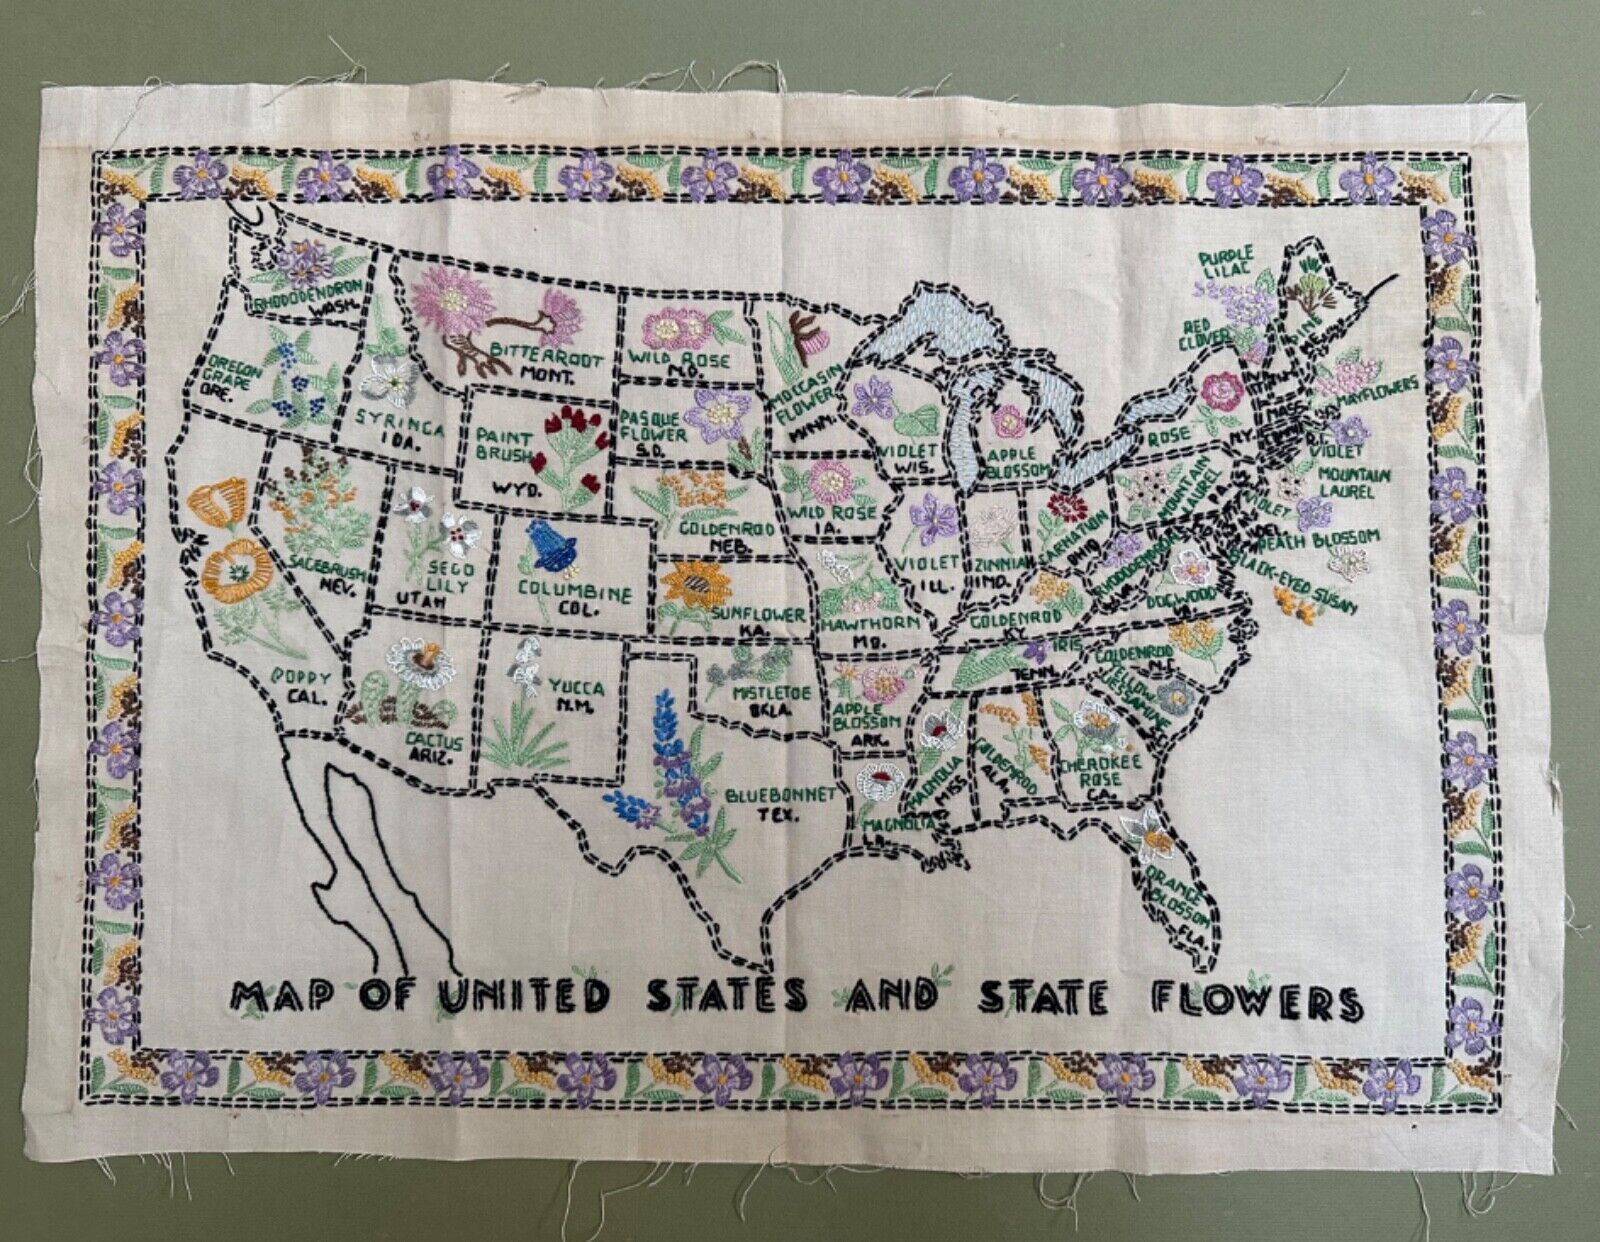 Needle Point Sampler Embroidered Map of United States & State Flowers Vintage